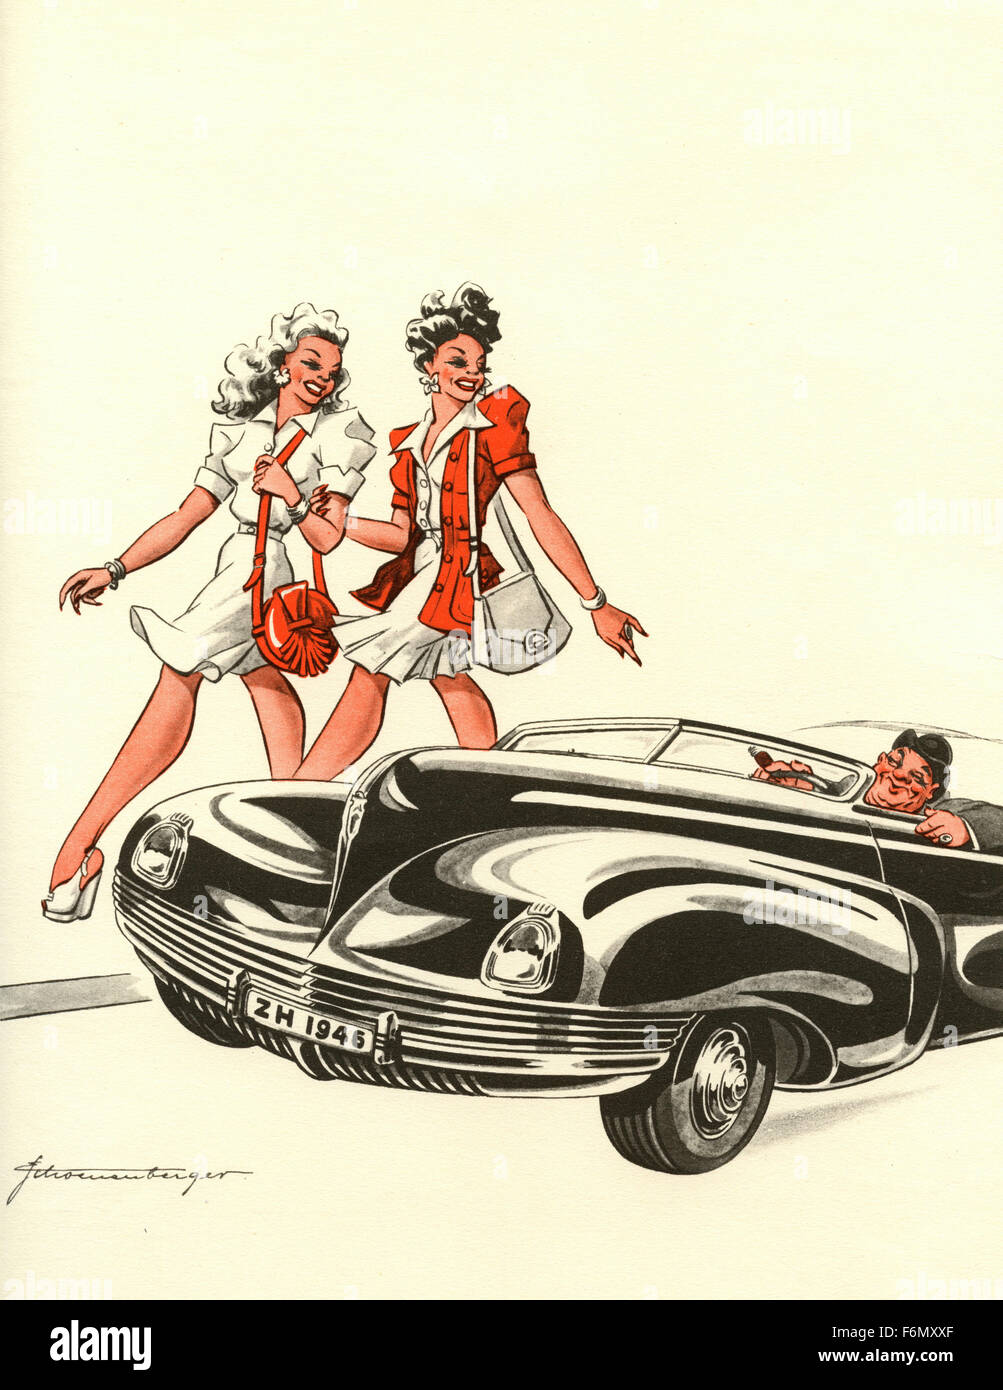 German satirical illustrations 1950: A man in car wooing two girls Stock Photo